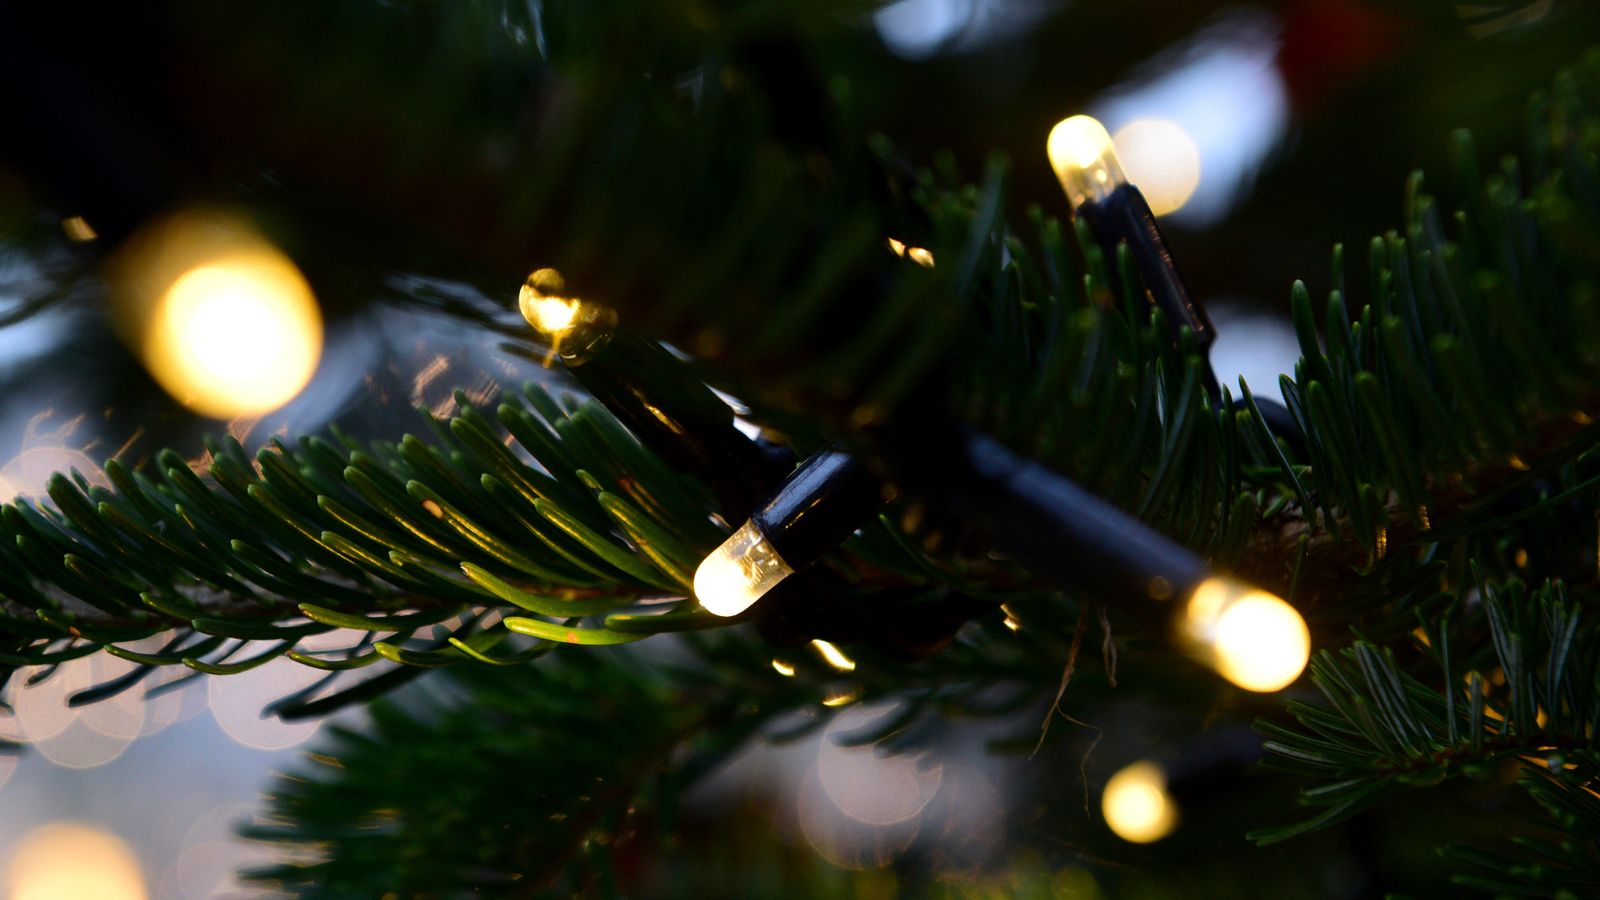 Illegal Christmas lights being sold online putting customers at risk of electric shock or fire, says Which?